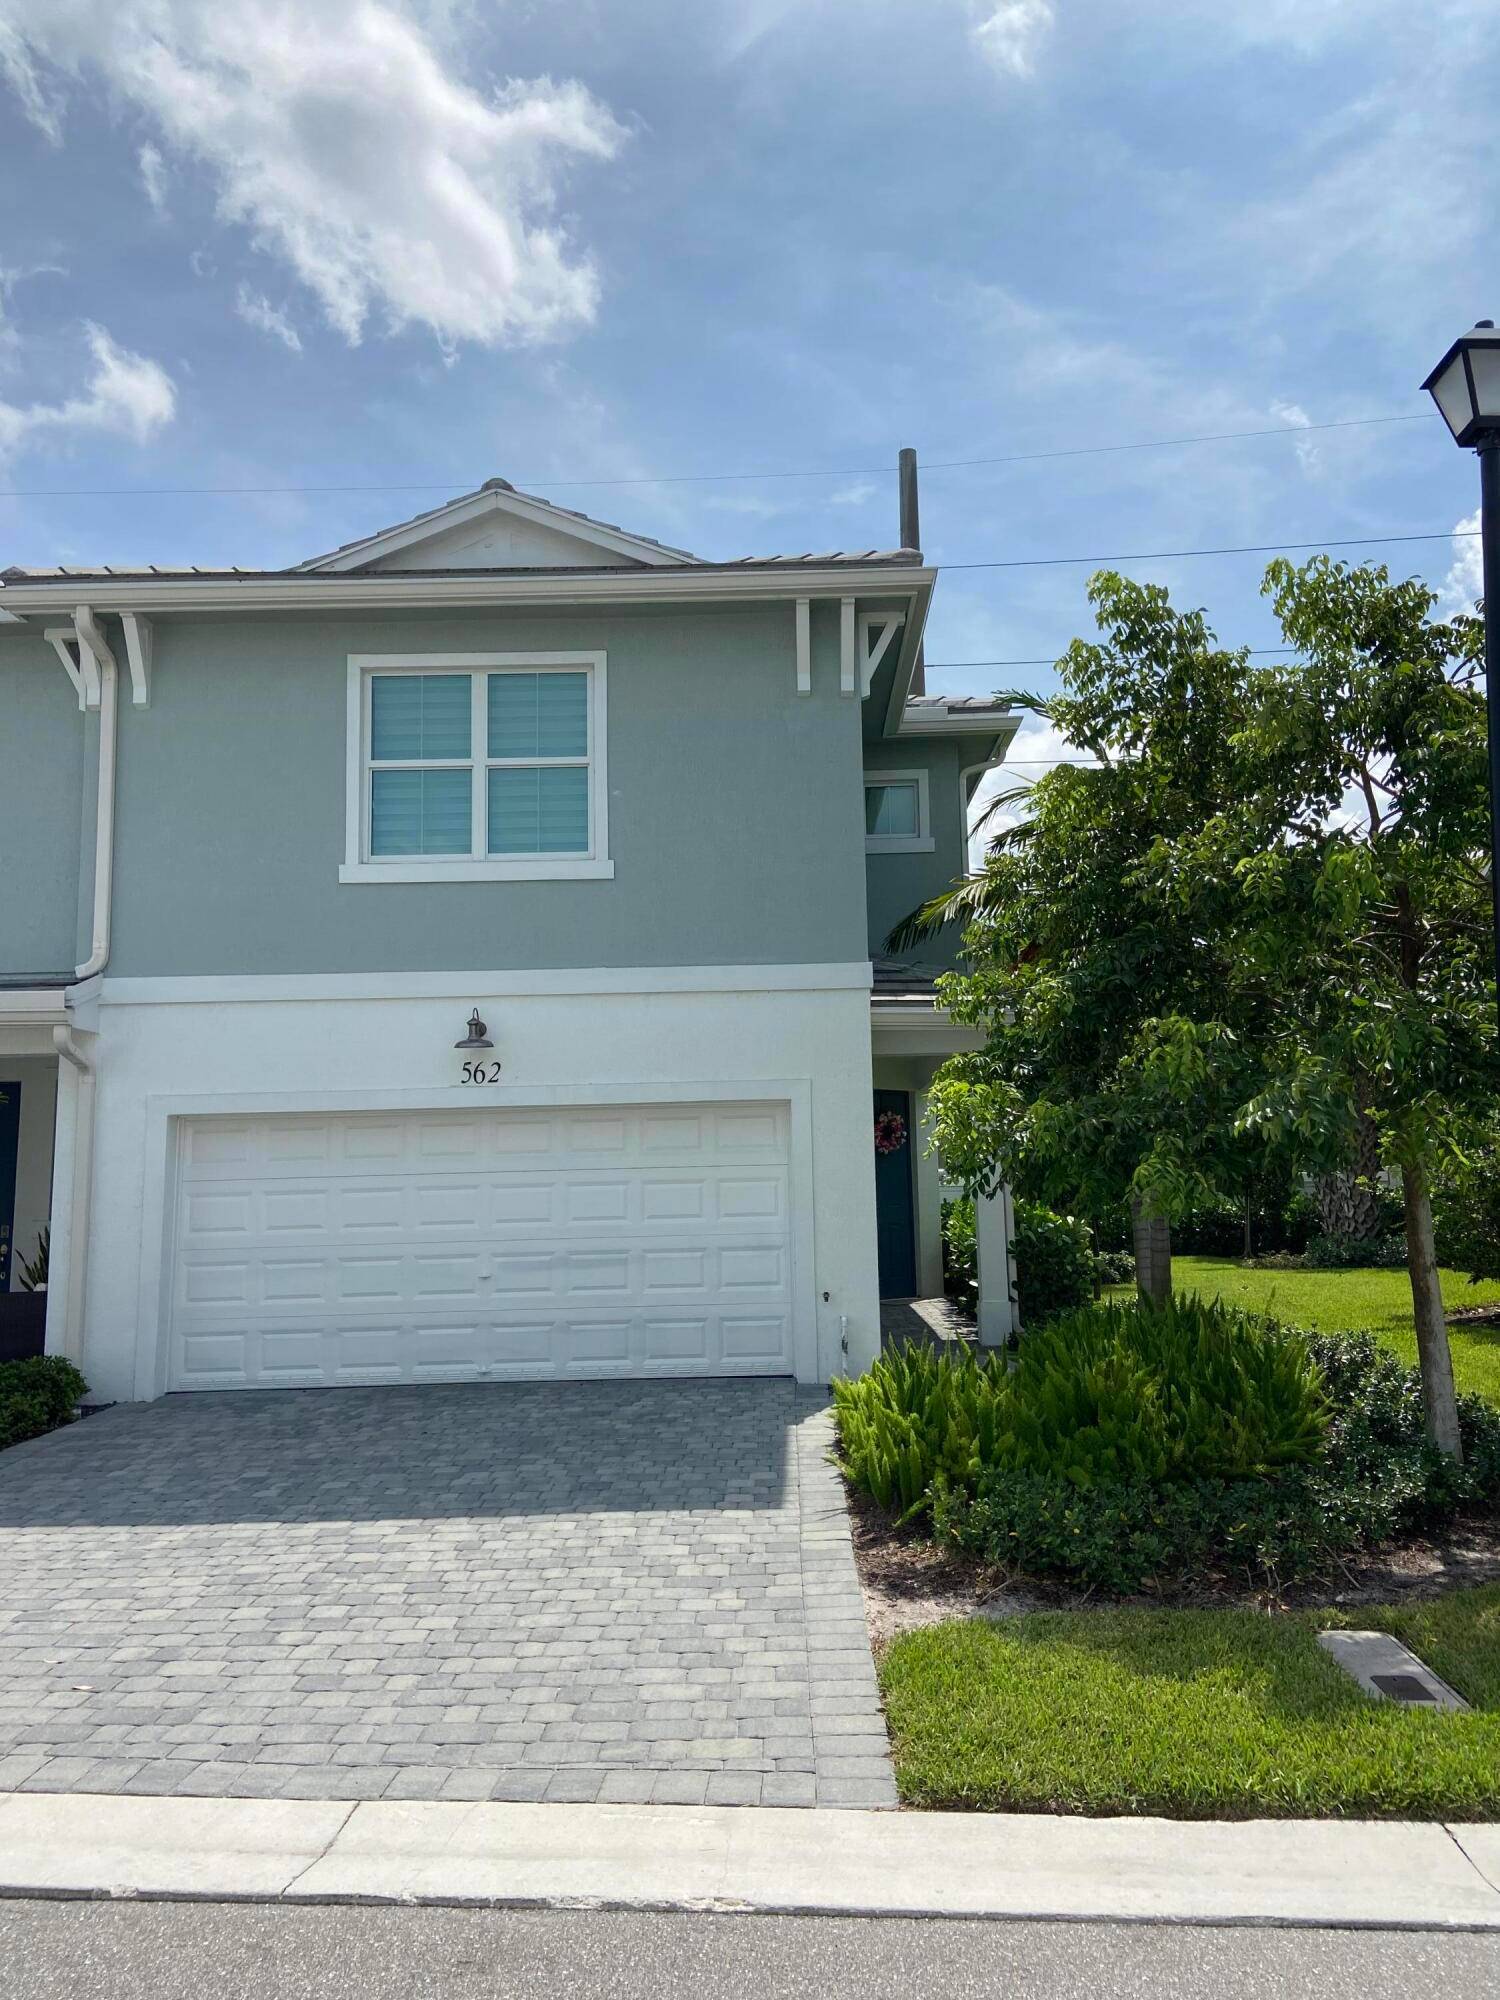 NEW CONSTRUCTION LUXURY TOWNHOME Large 2 story luxury Townhome 4 miles from the beach with easy access to I 95, Turnpike and Sawgrass.